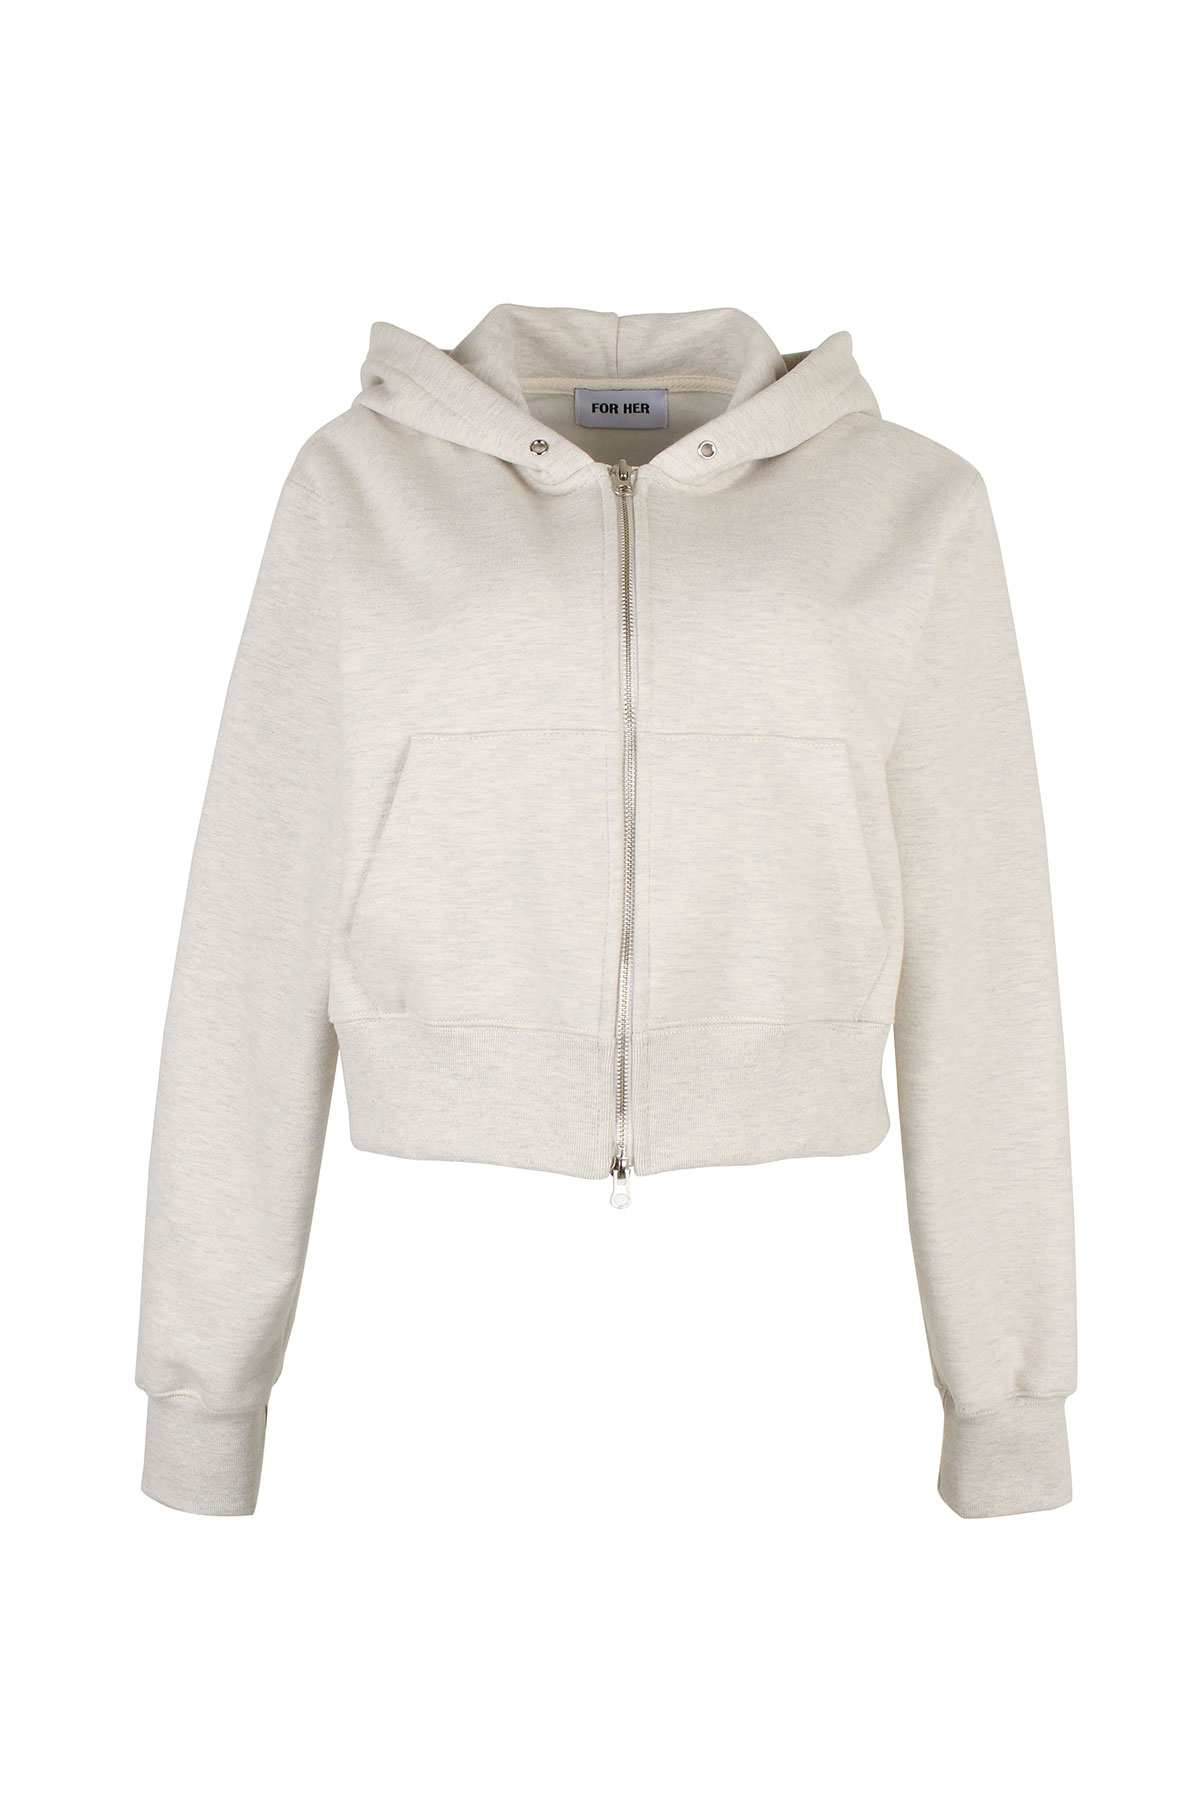 FOR HER. NAPPING CROP HOODIE ZIP UP (3차 진행)